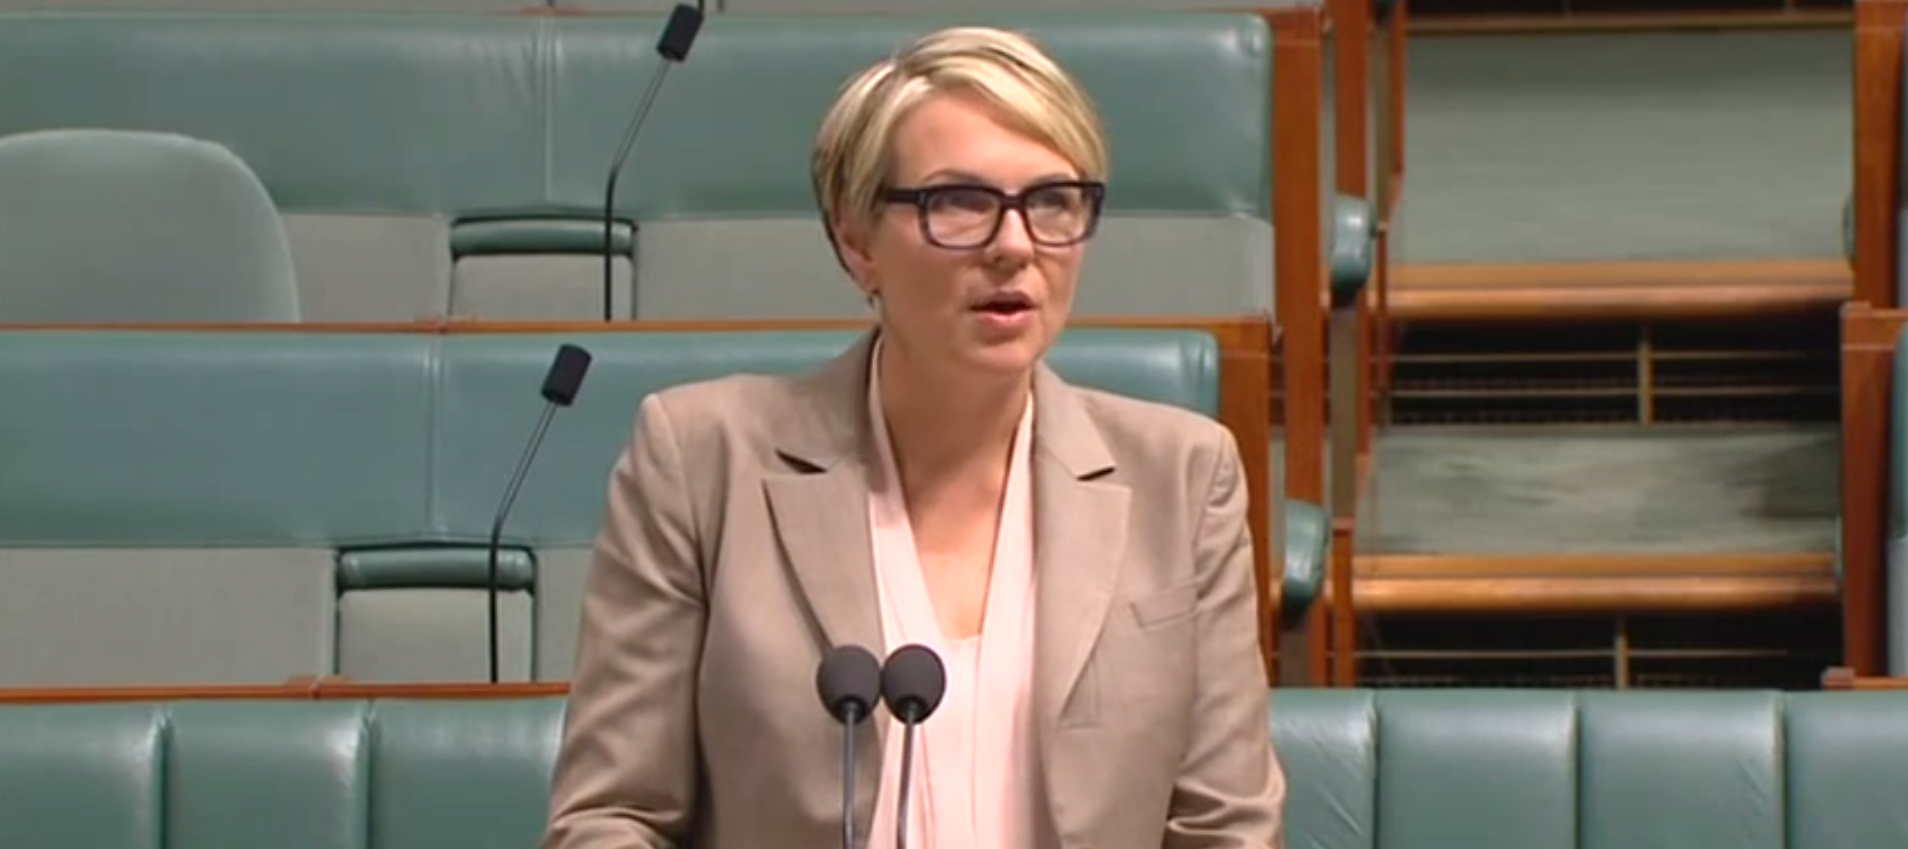 Tanya Plibersek to PM: Grant a conscience vote on gay marriage as a Mardi Gras present